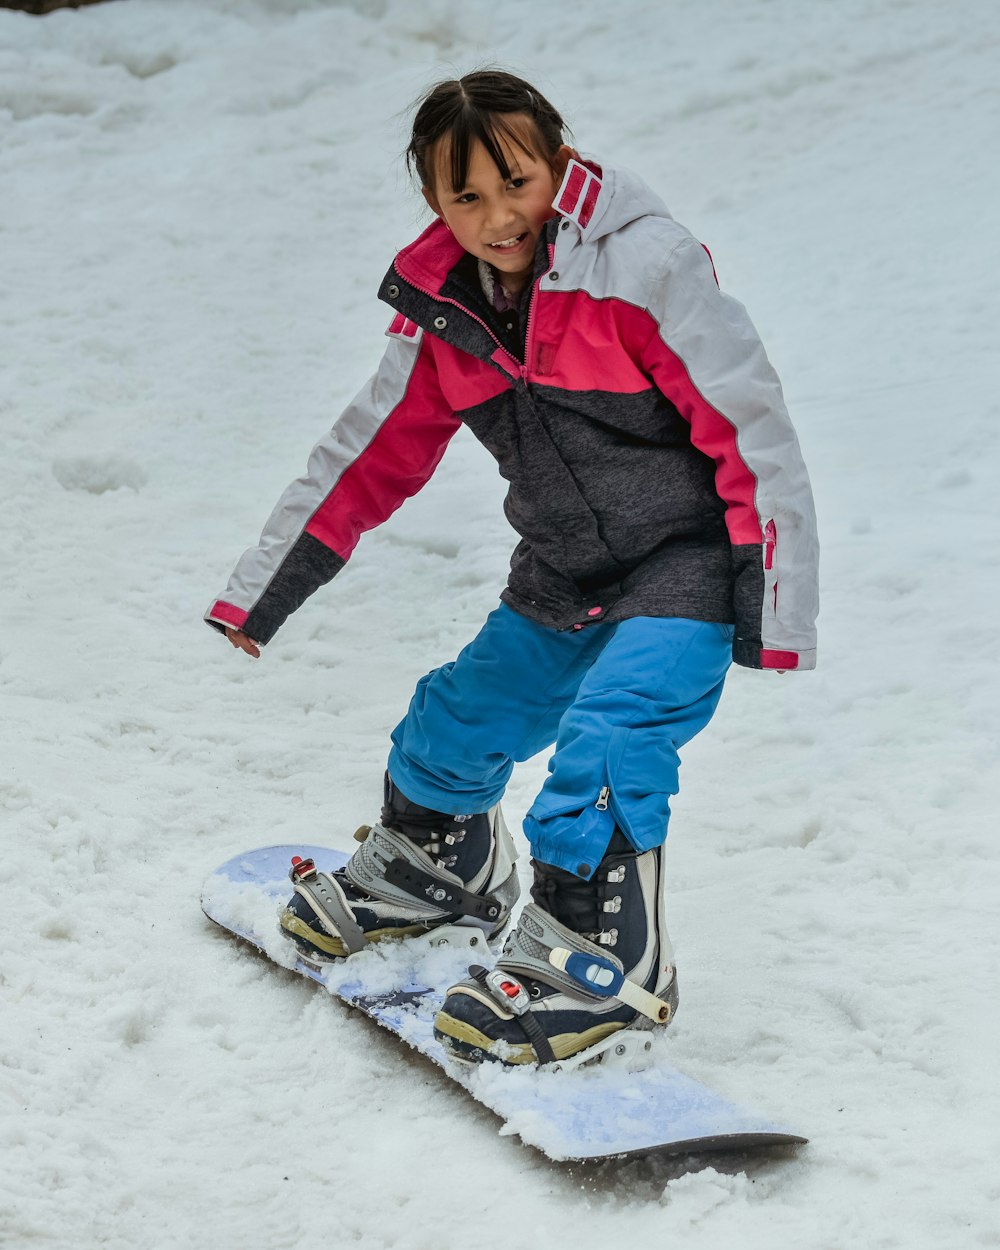 a young girl riding a snowboard down a snow covered slope